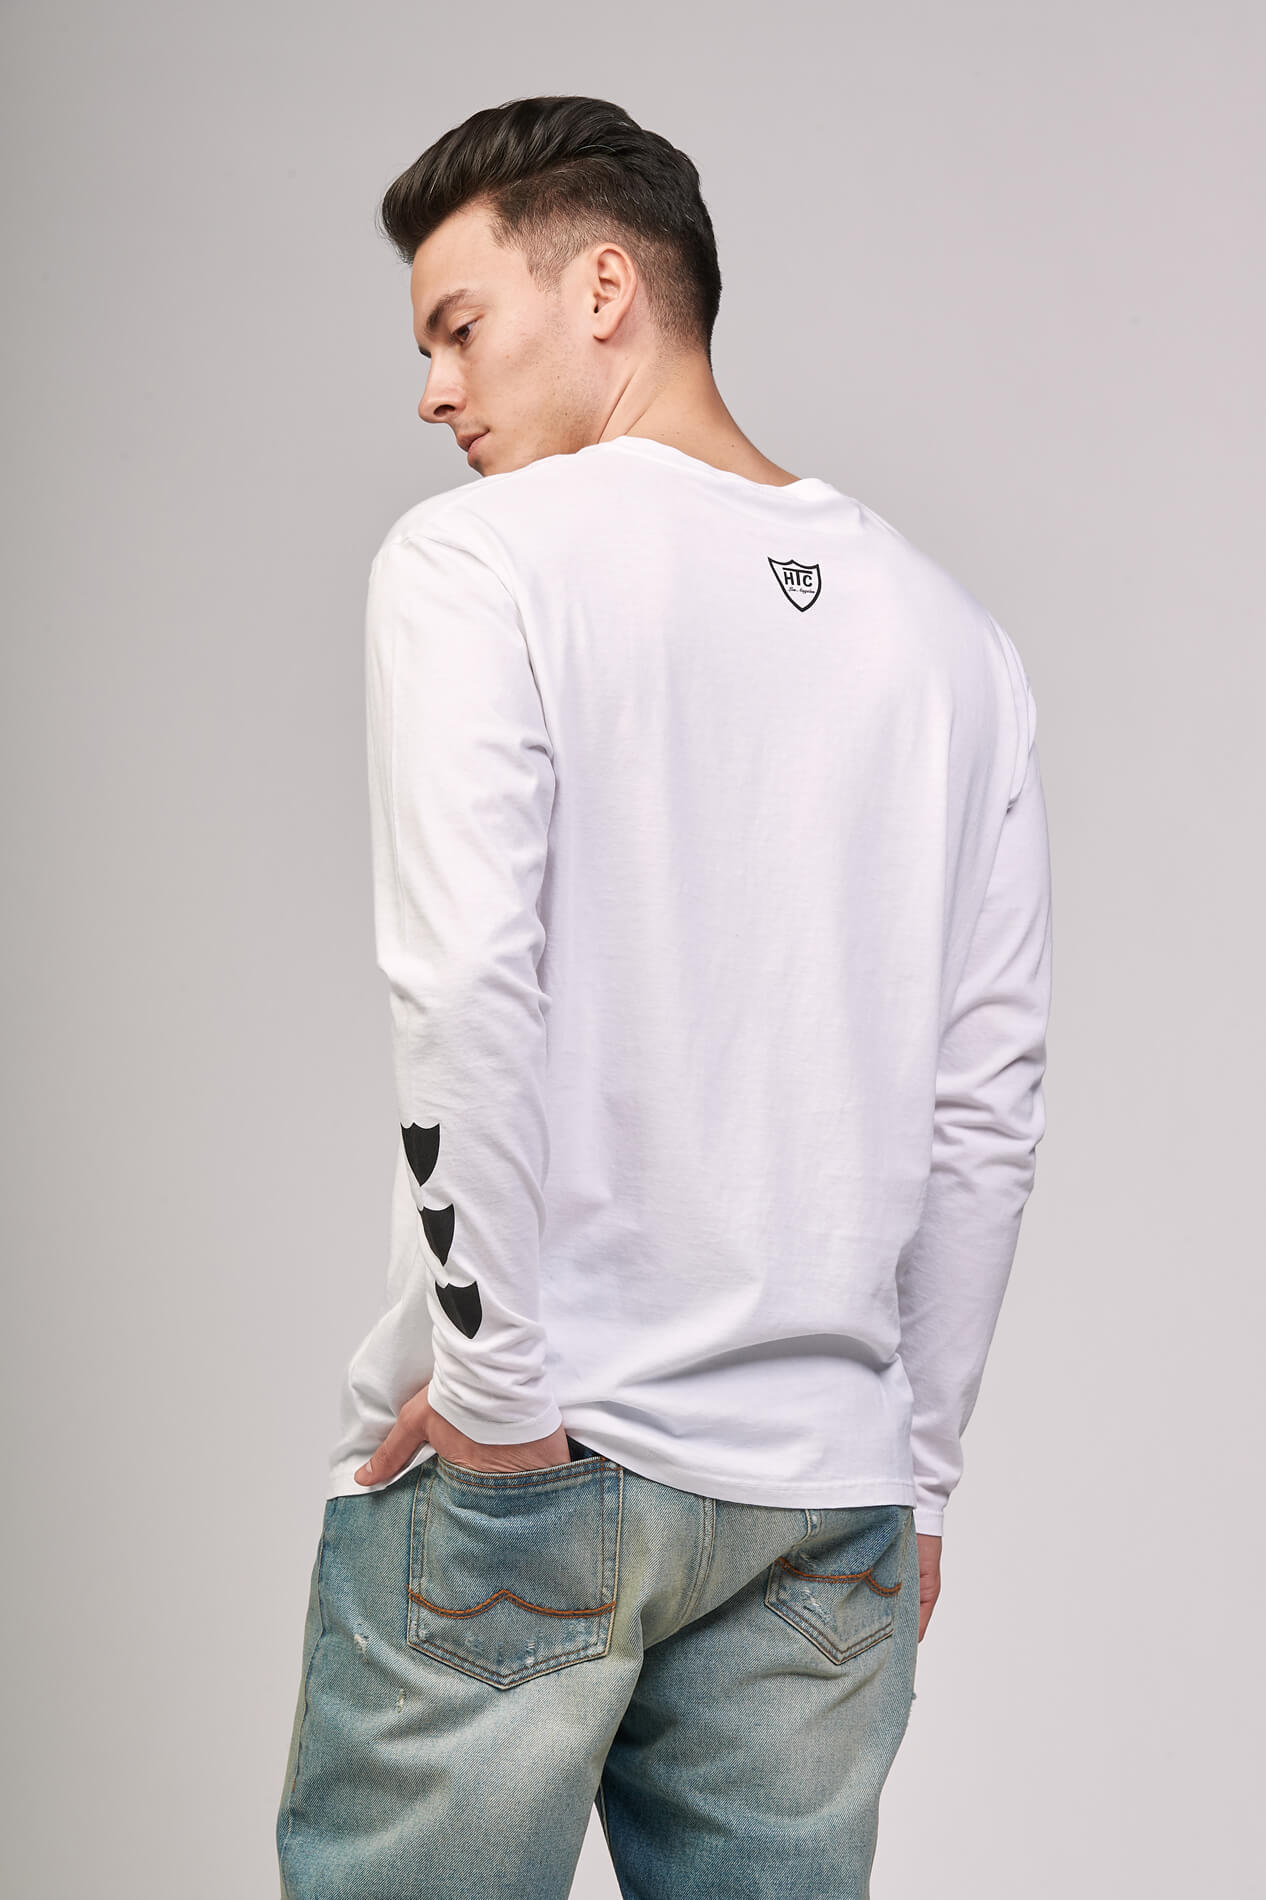 SHIELDS LS T-SHIRT Regular fit long sleeve t-shirt with logo prints on the sleeve. 100% cotton. Made in Italy. HTC LOS ANGELES